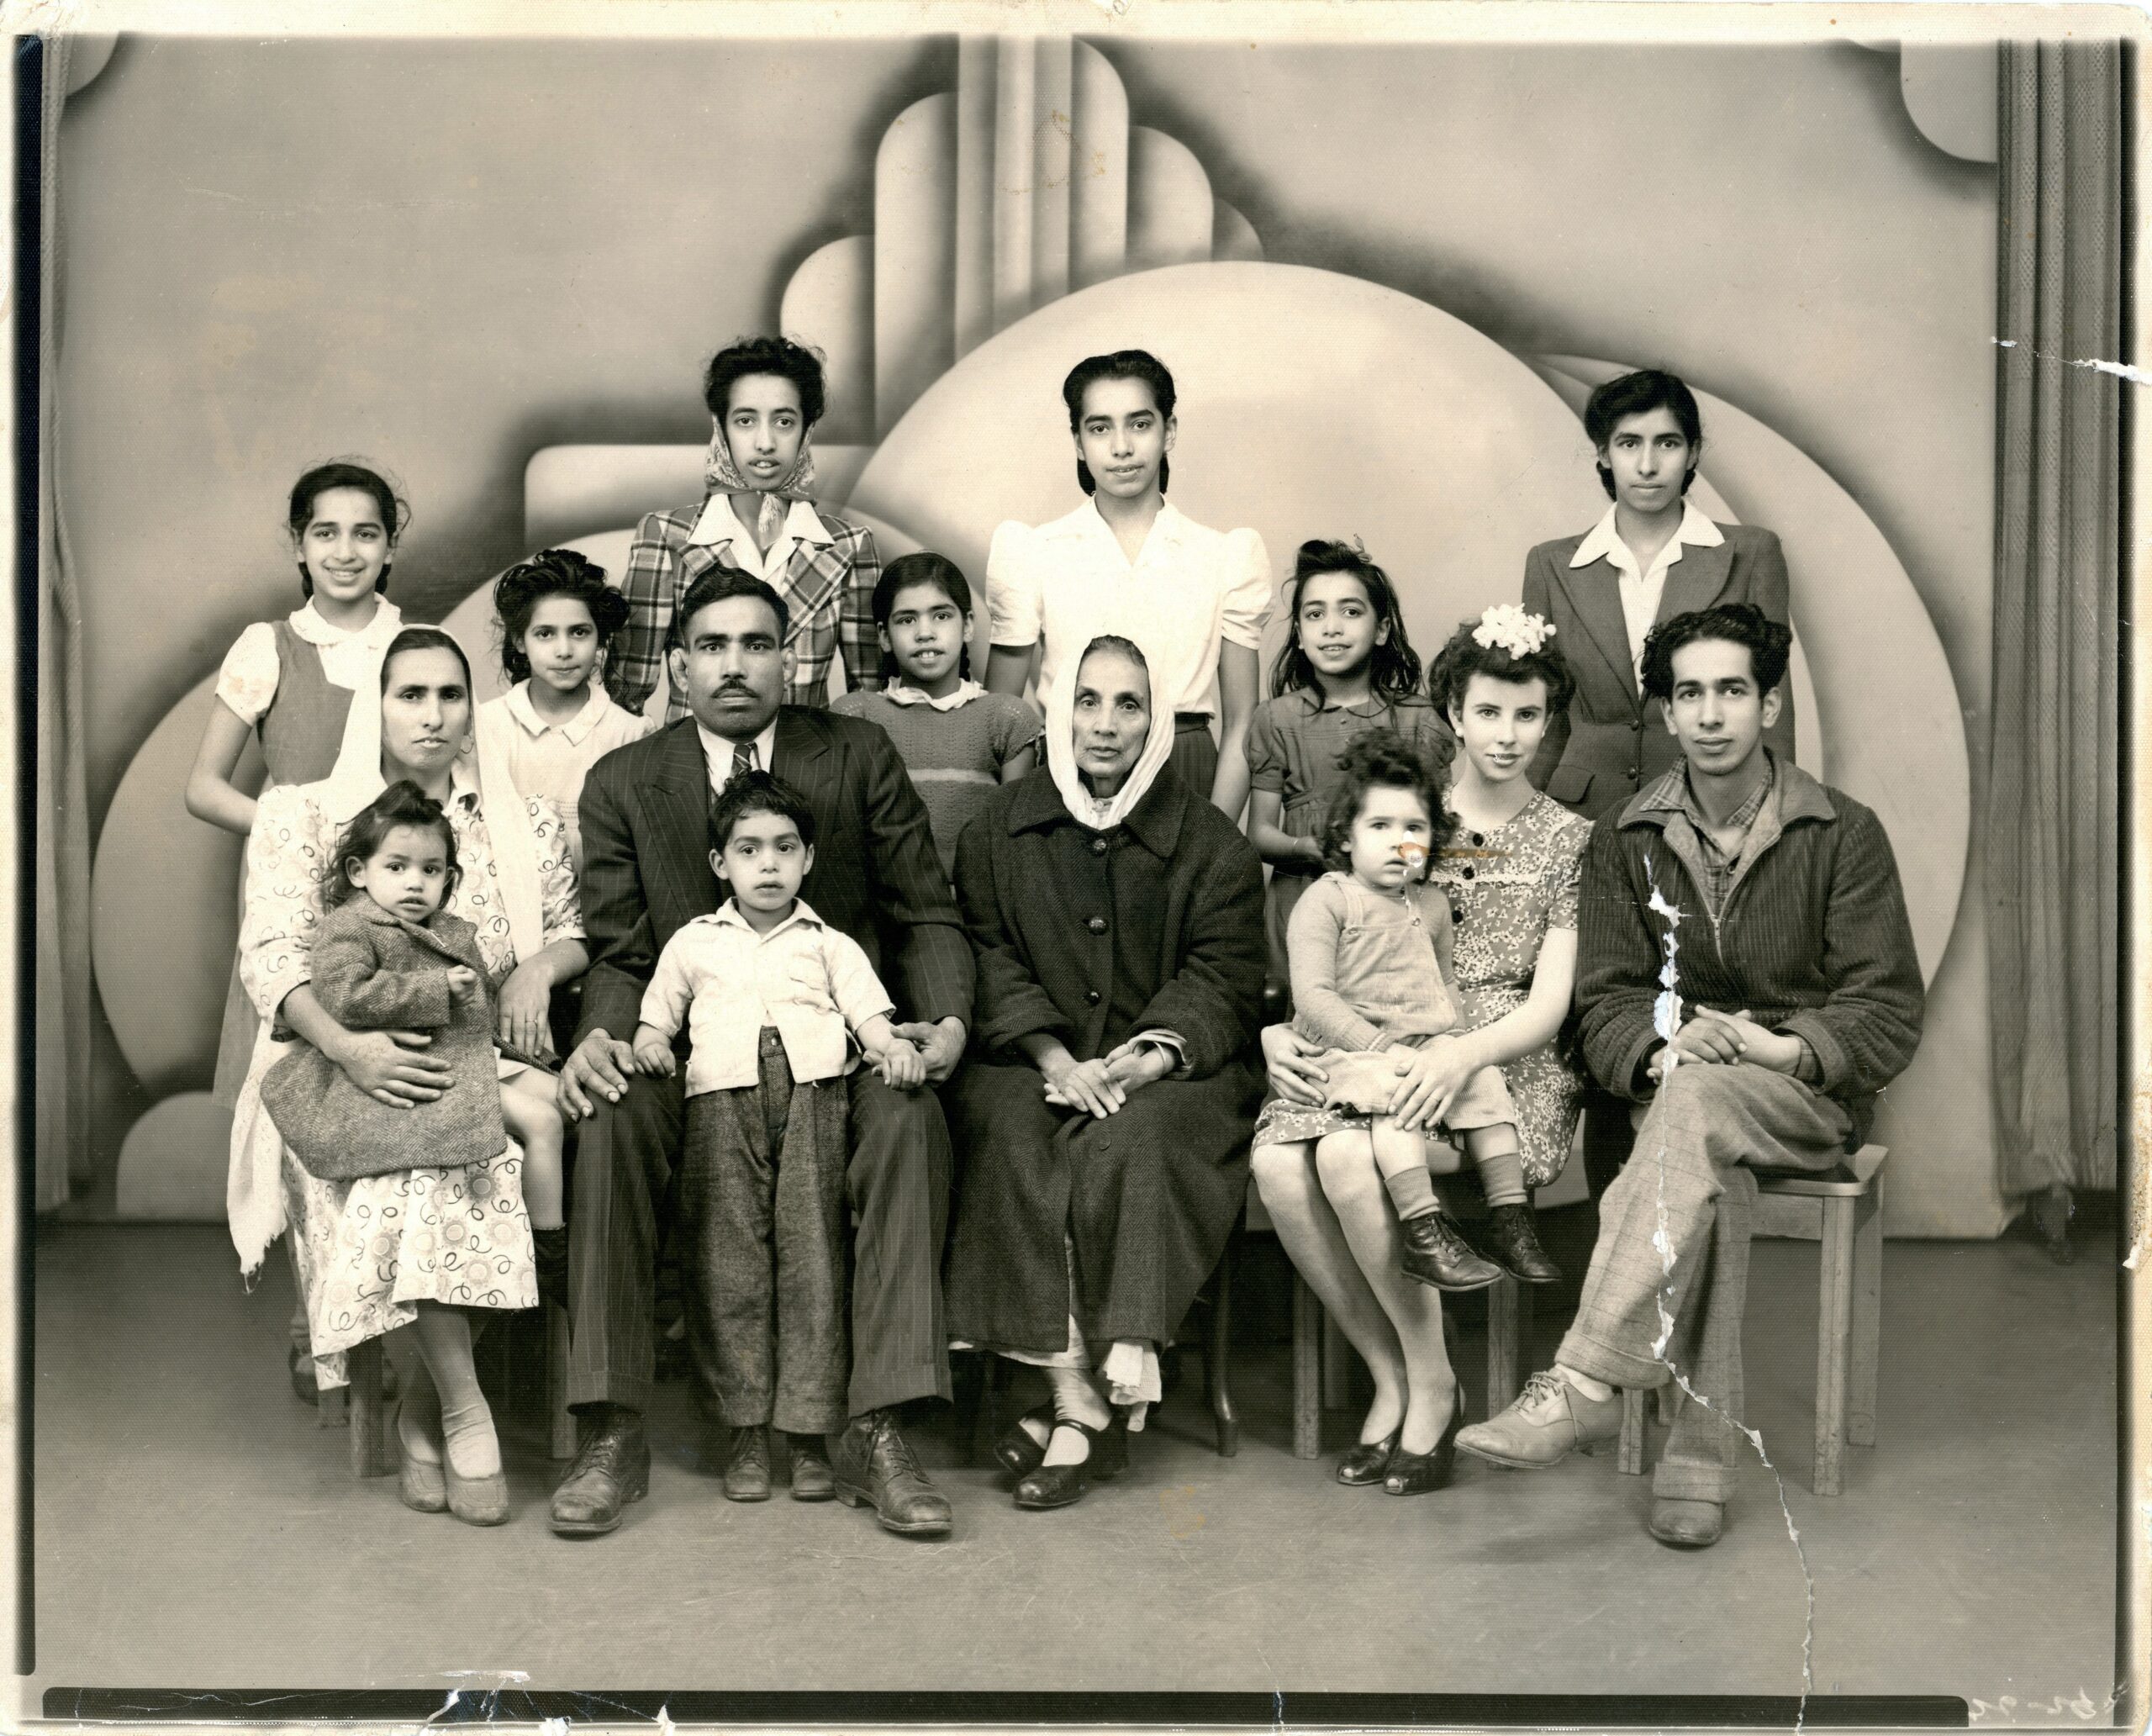 Gurdas Singh Johal family, 1940s. Reference code: AM1688-S1-F5-: 2021-034.179